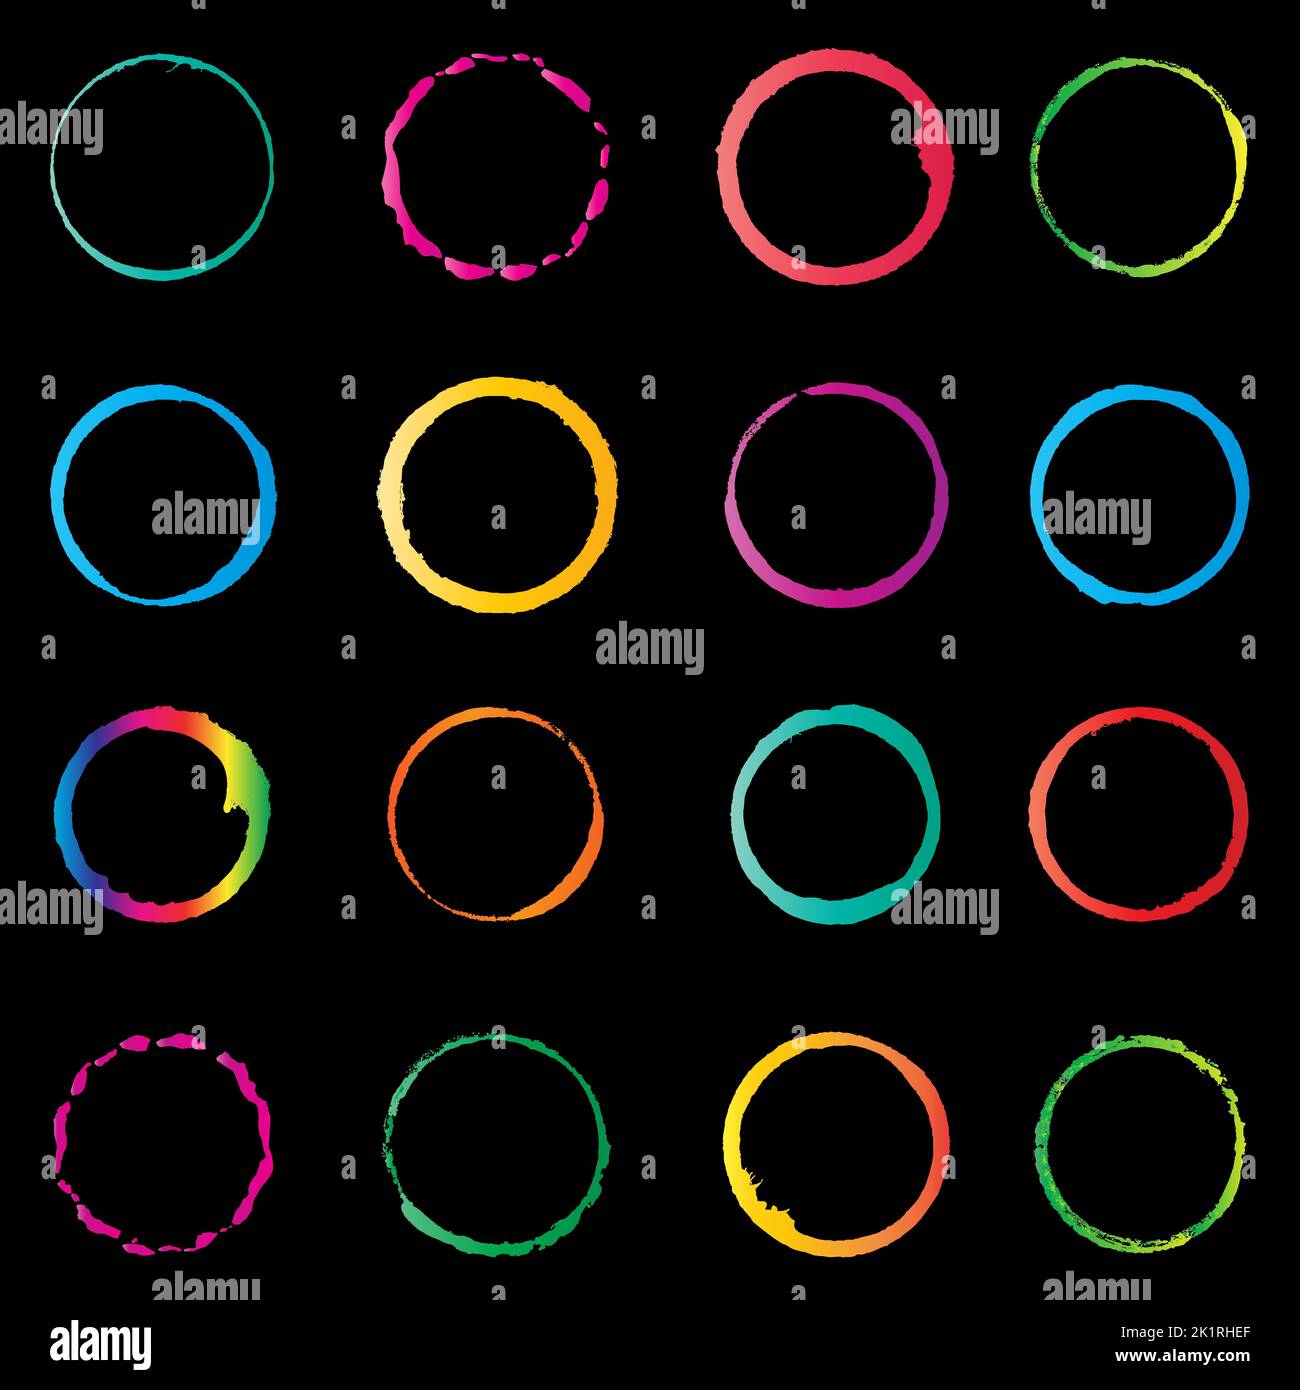 Set of vector circle icons on black background. Stock Vector